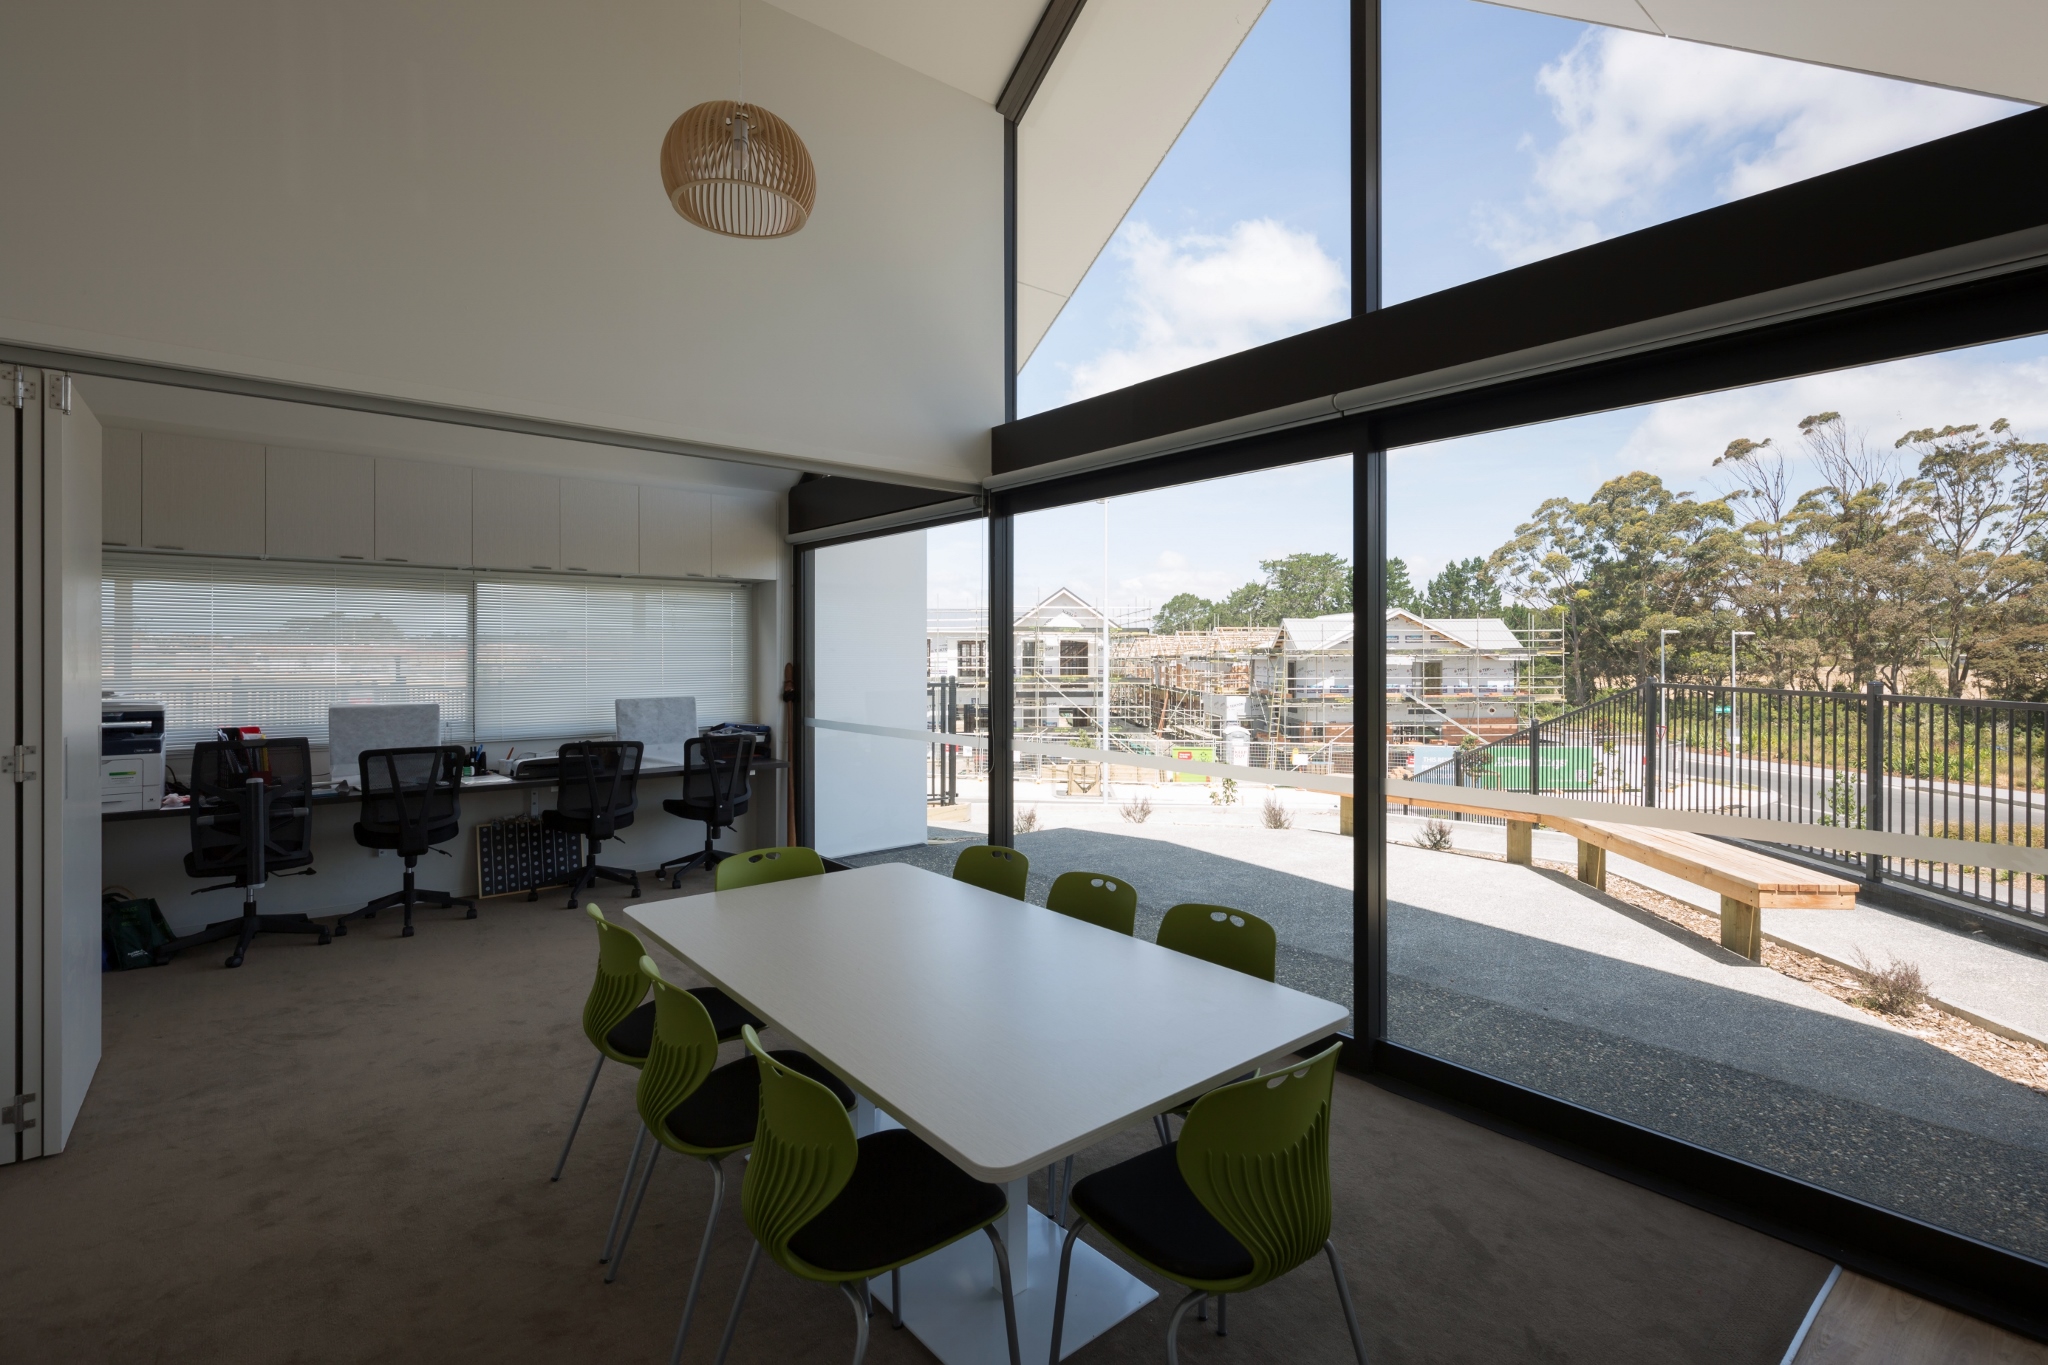 hobsonville point early learning centre-14